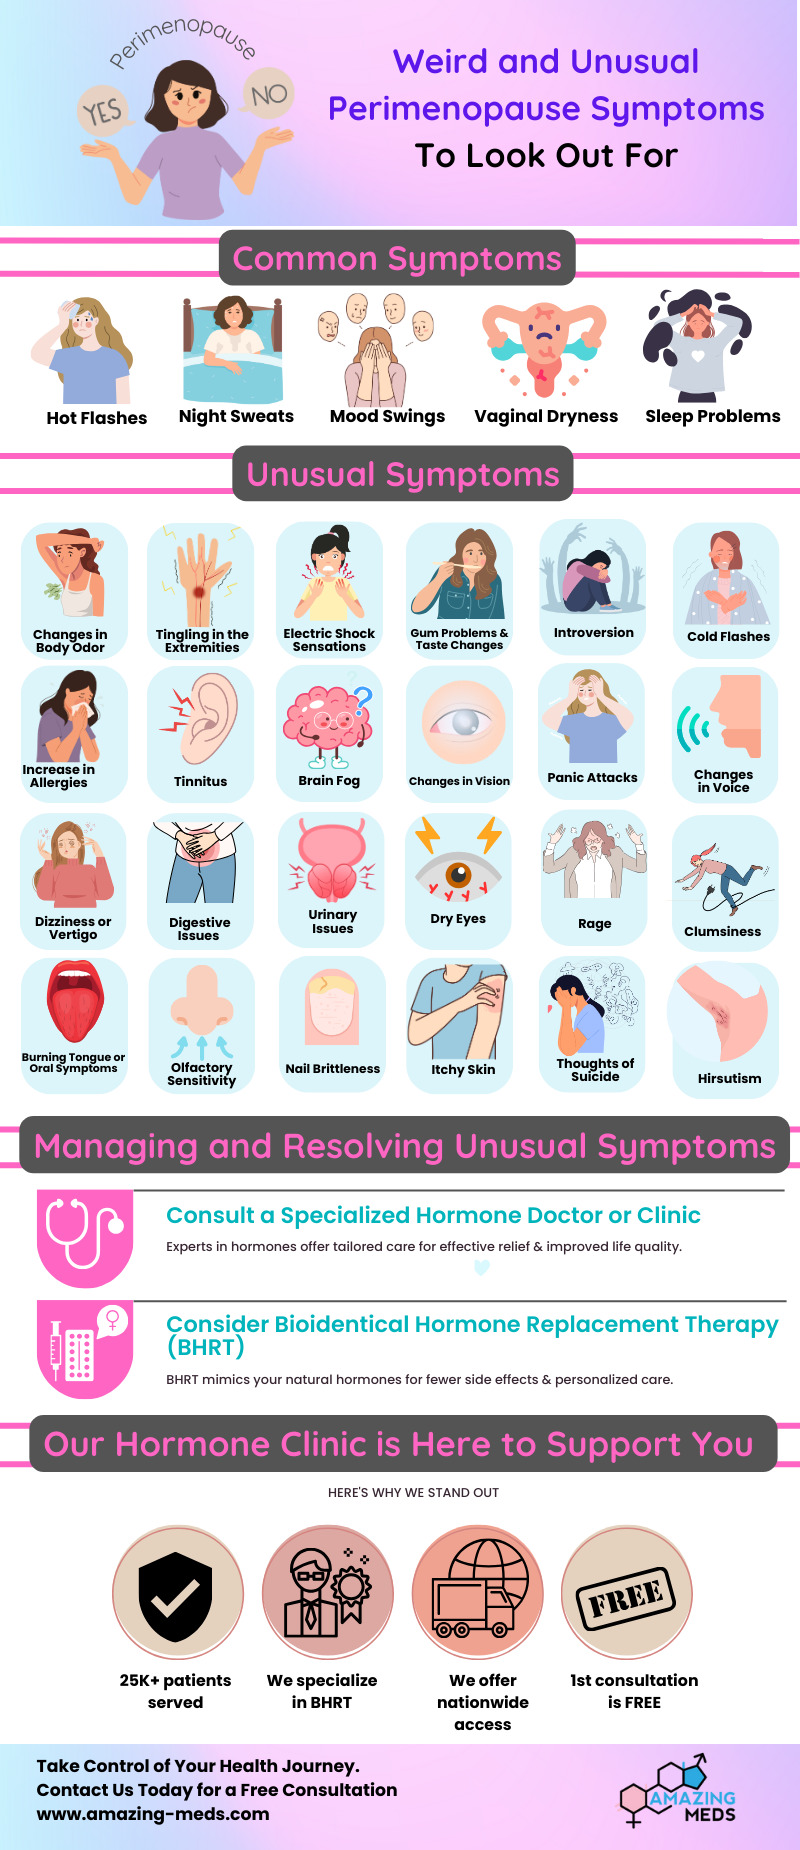 Weird and Unusual Perimenopause Symptoms